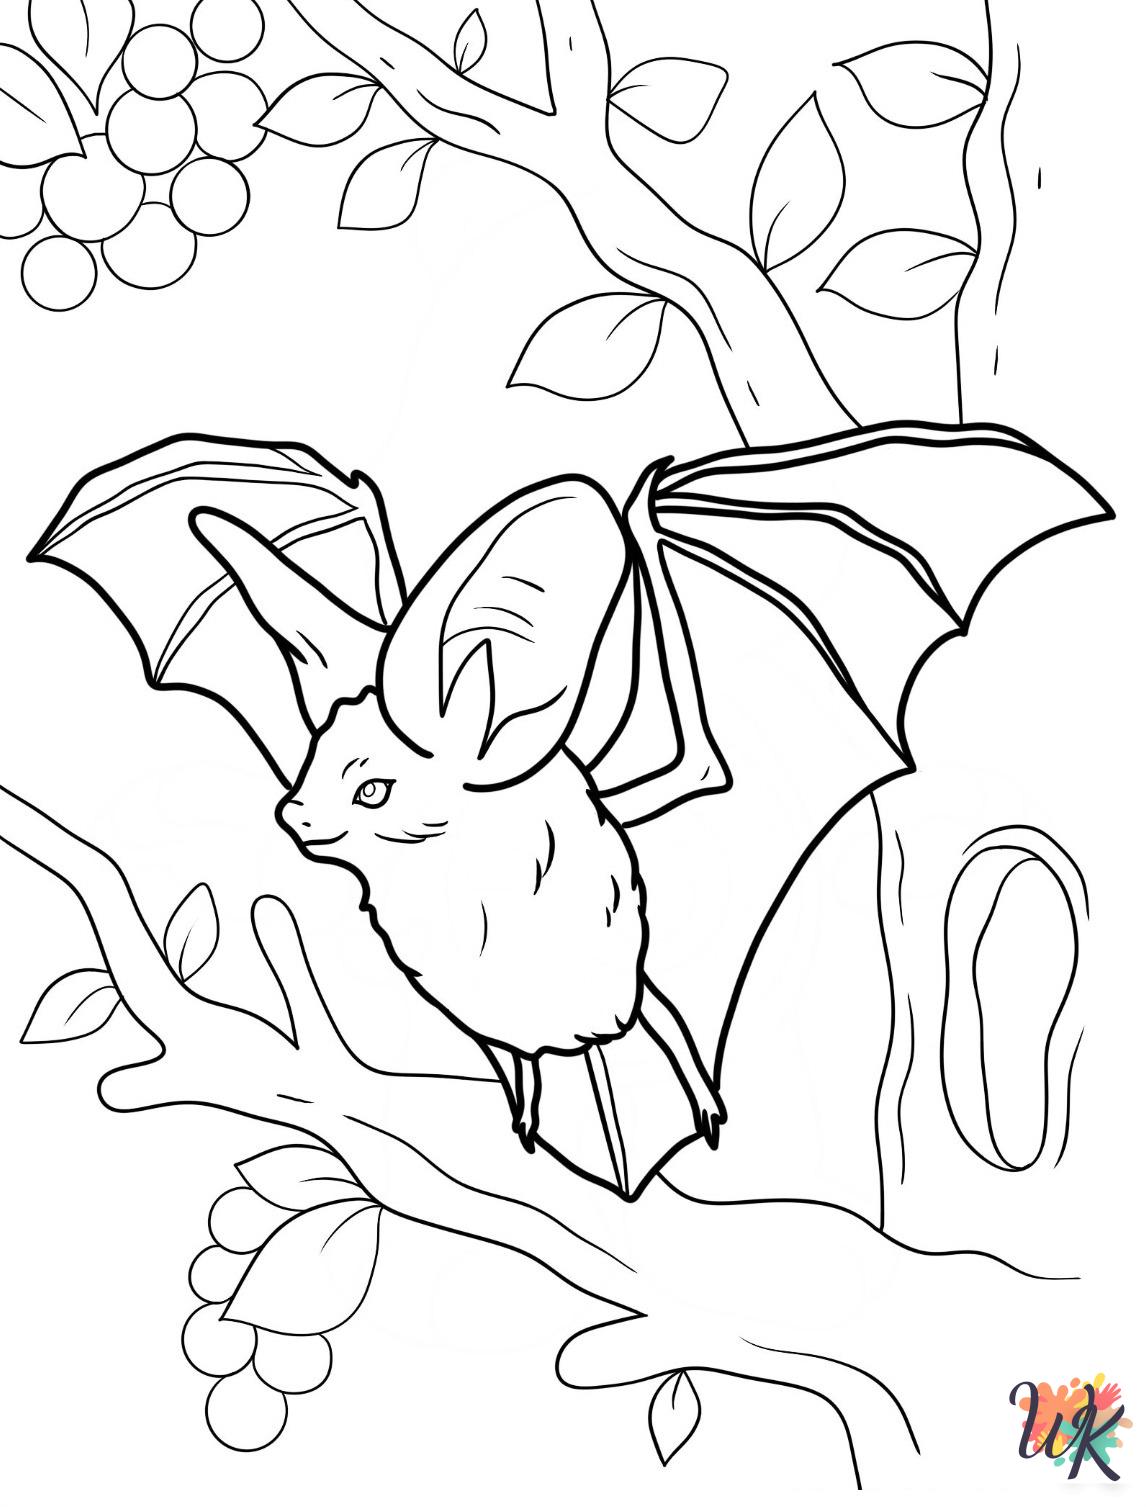 Bat coloring pages free printable